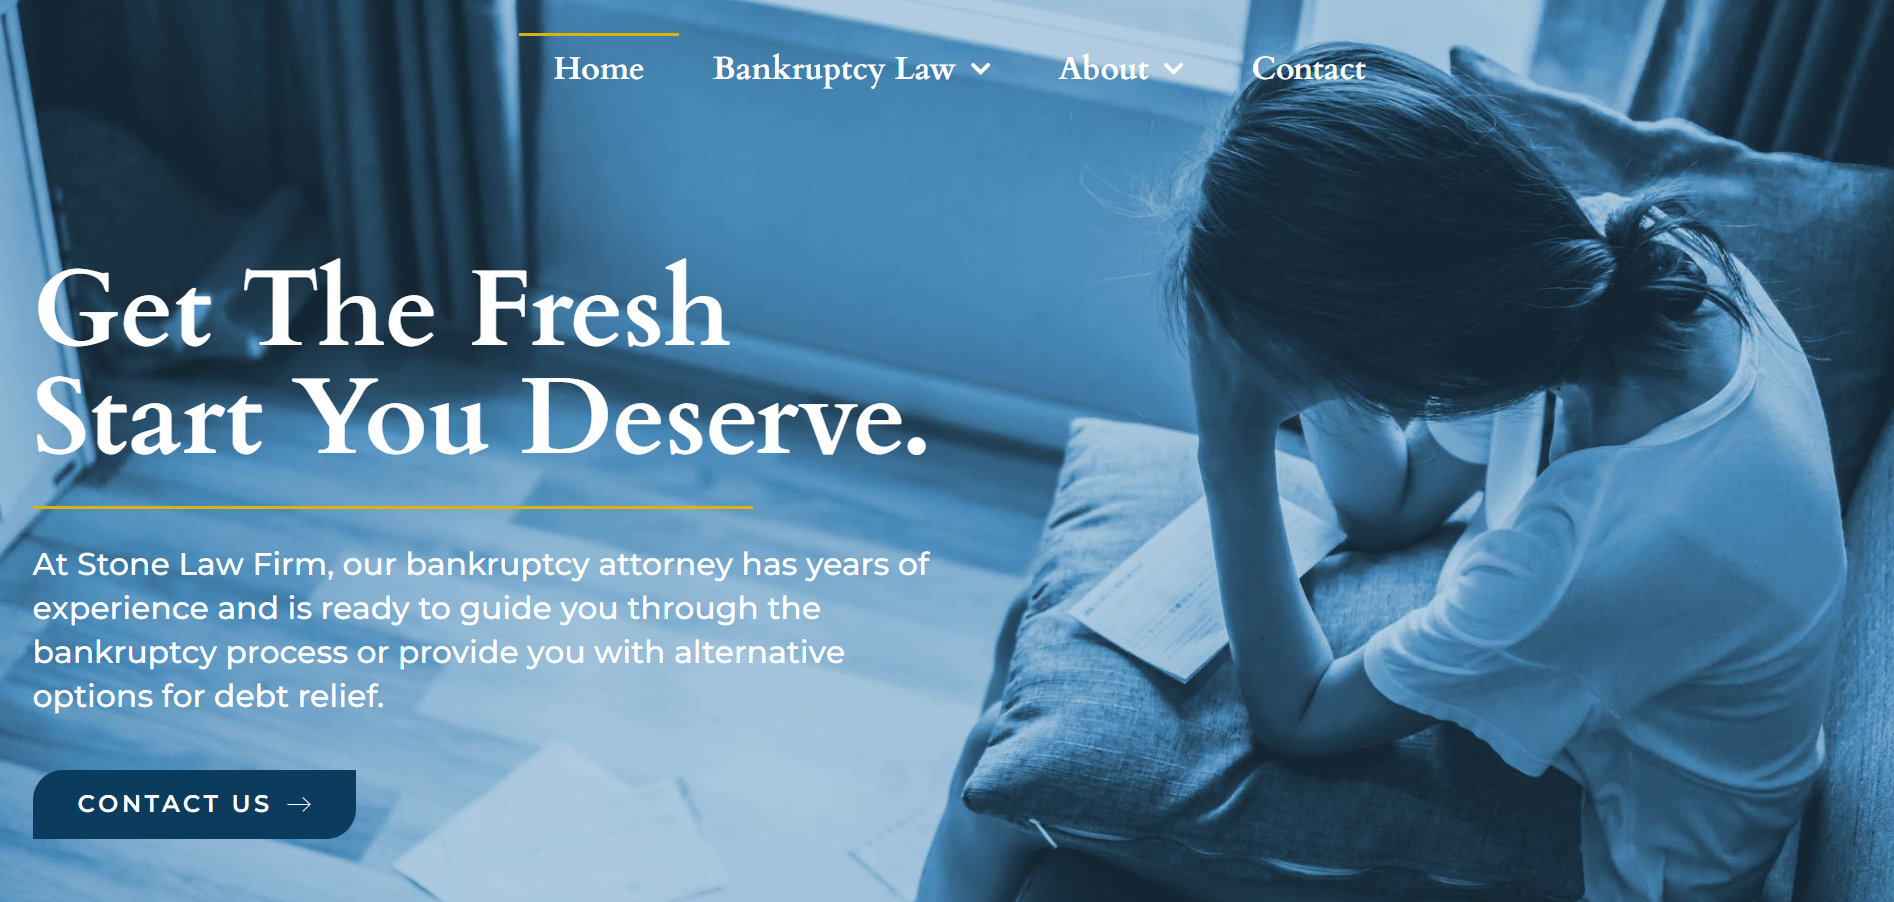 Stone Law Firm Bankruptcy Lawyers in Irmo SC